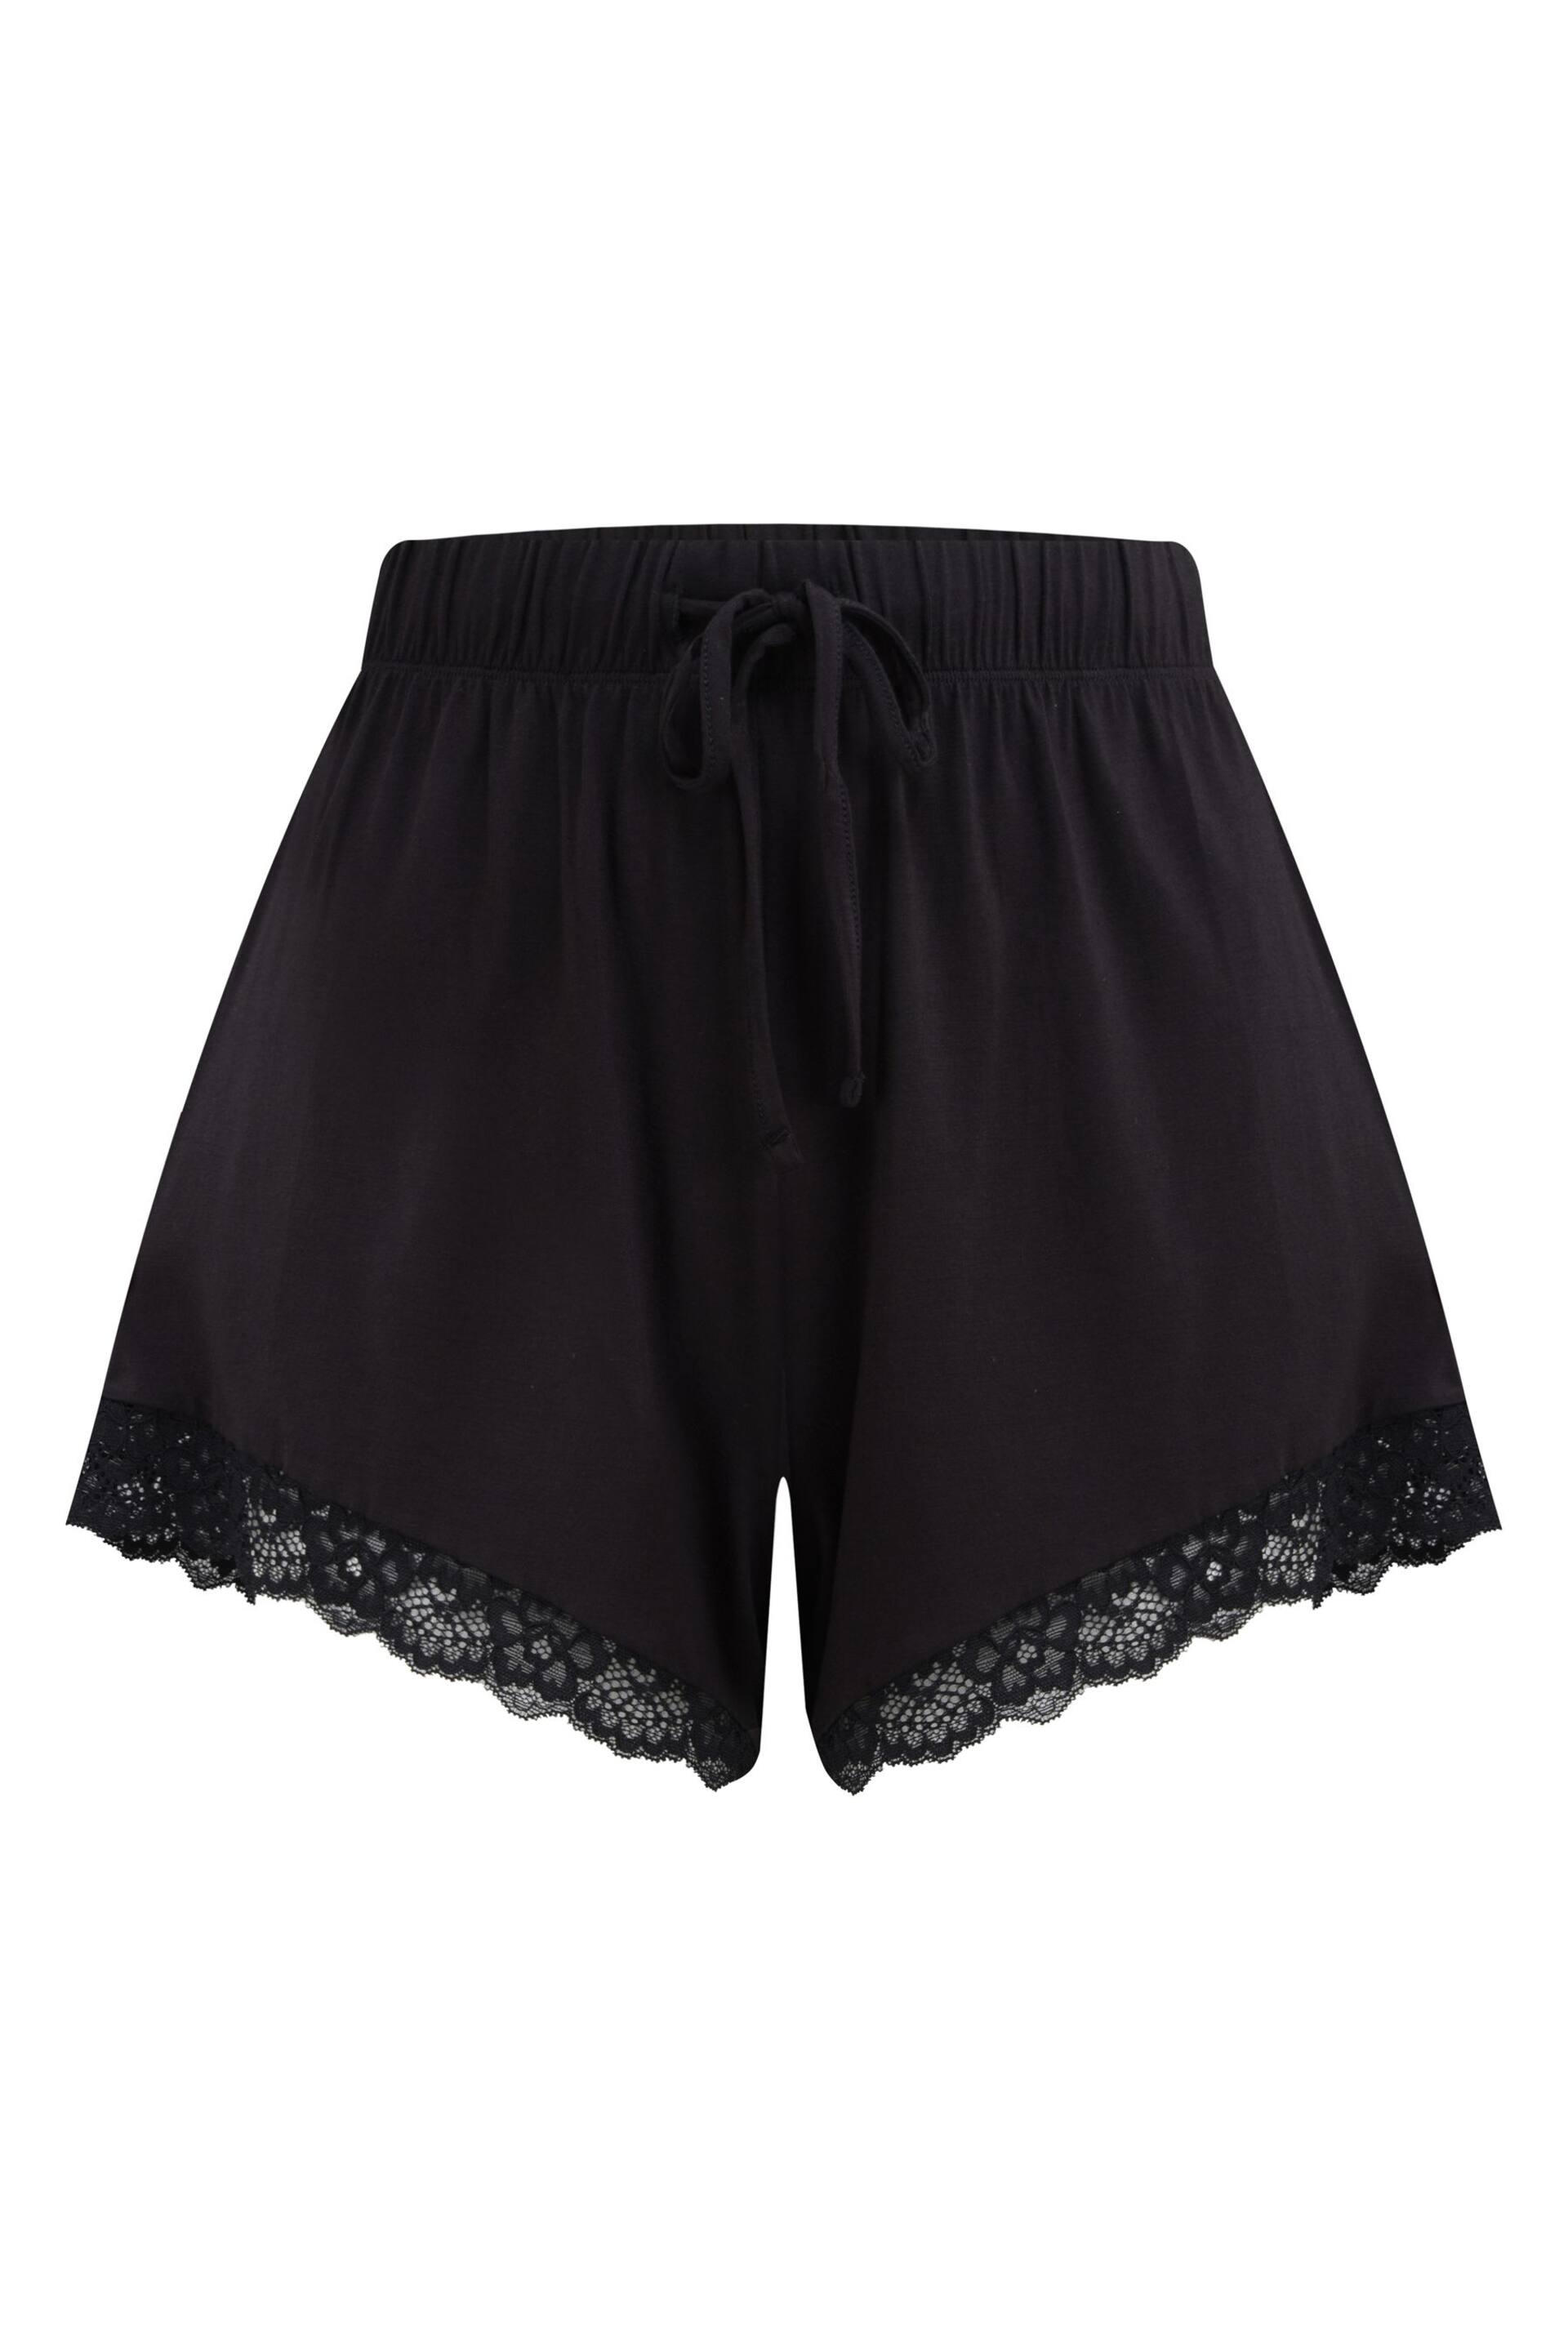 Pour Moi Black Sofa Loves Lace Soft Jersey Shorts - Image 3 of 9